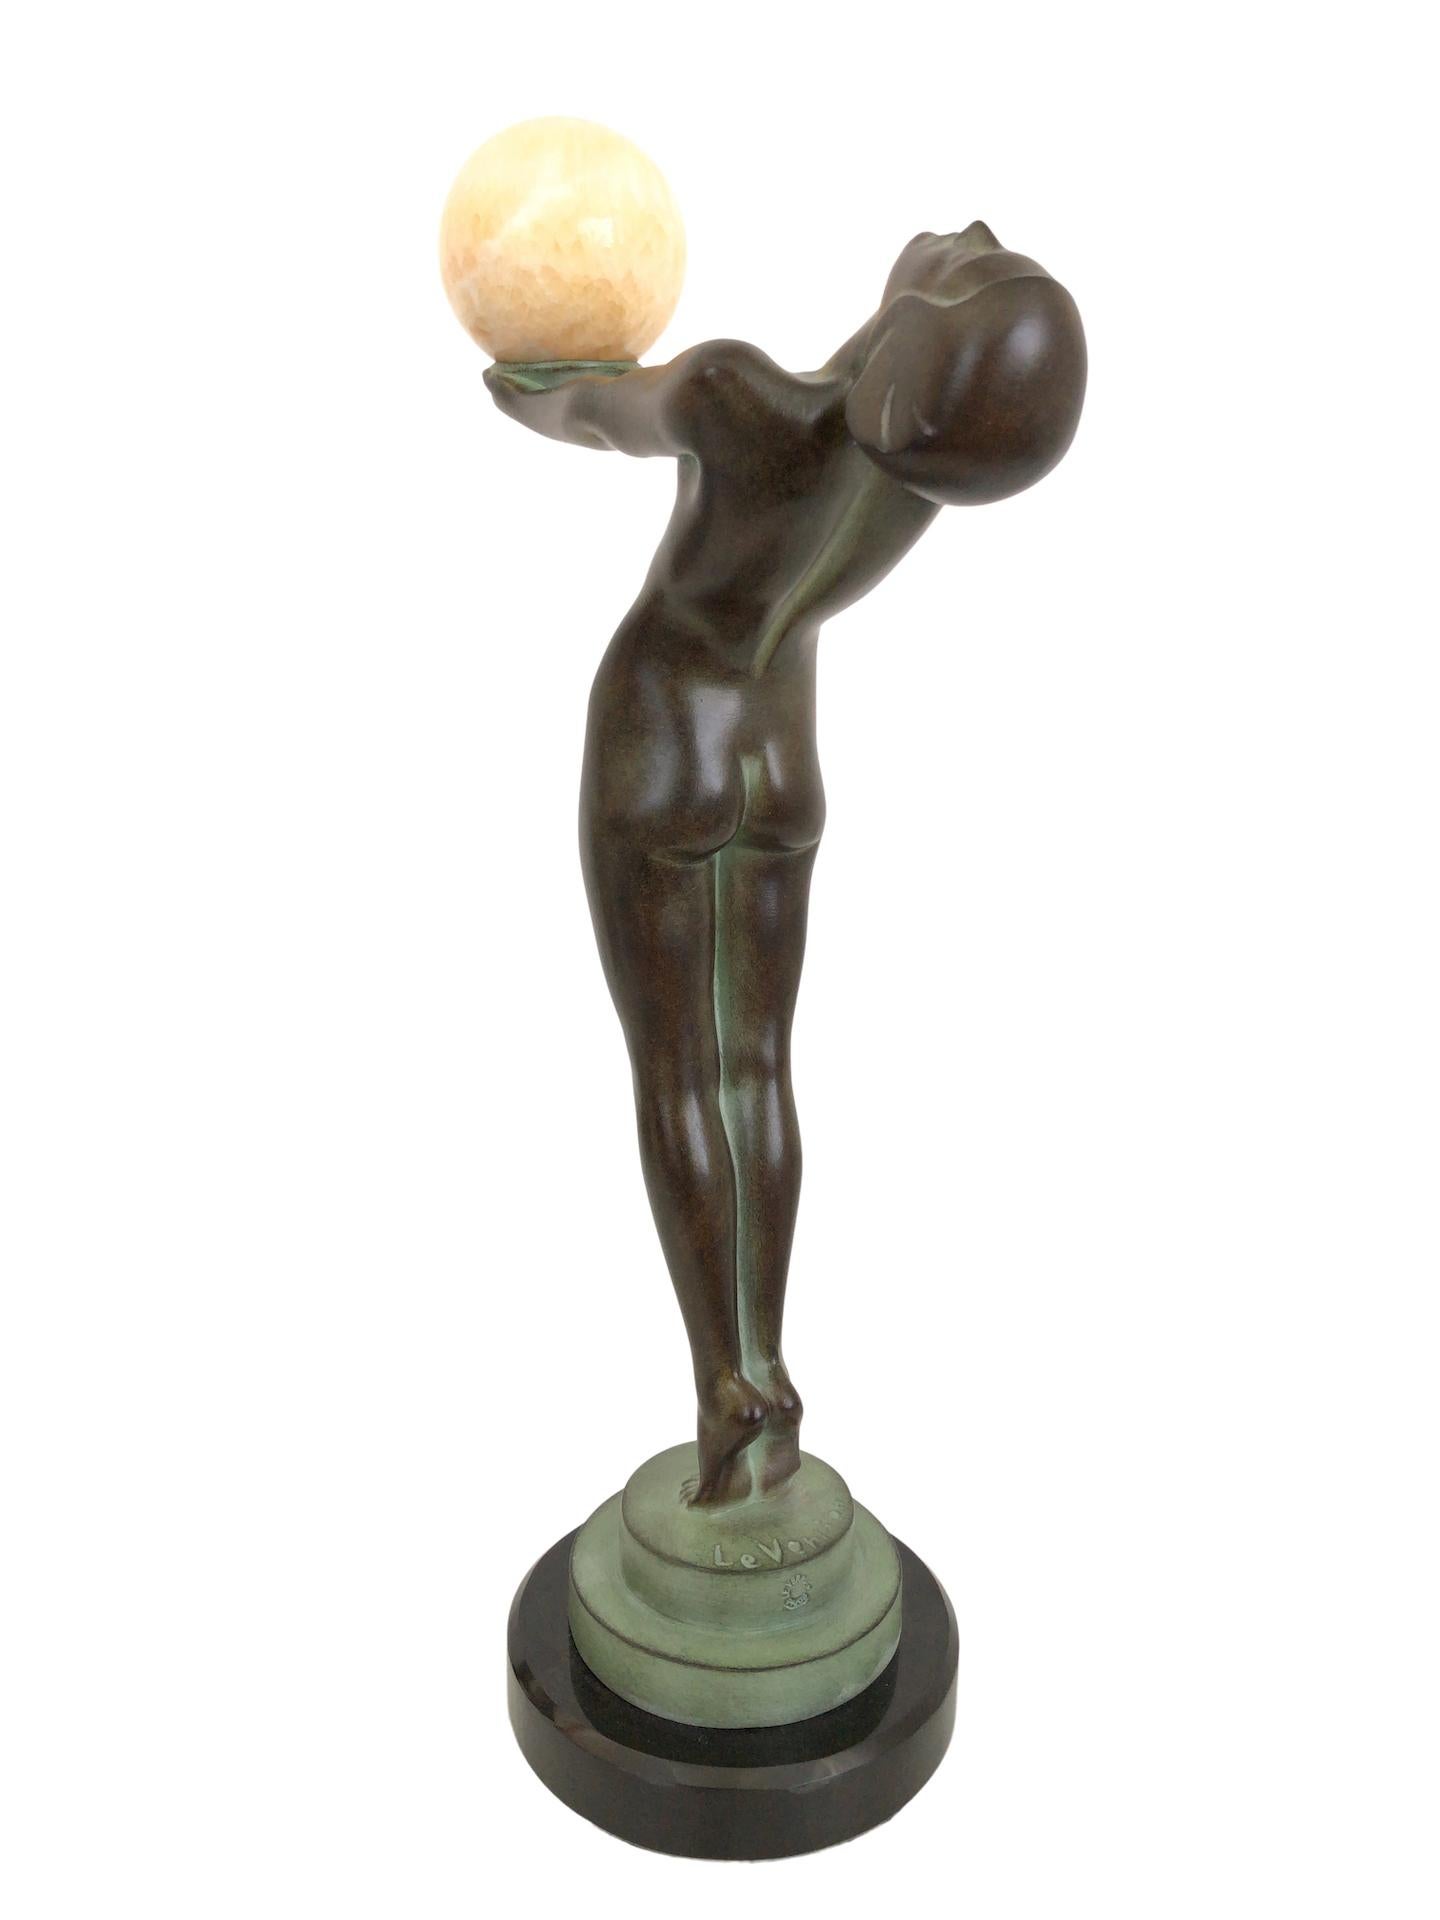 In 1928 Max Le Verrier created his famous CLARTÉ, a woman with a lighted glass ball, the main work of his career as a sculptor.

In fact, the needed several live models: one for the head, a second for the upper part of the body and a third for the